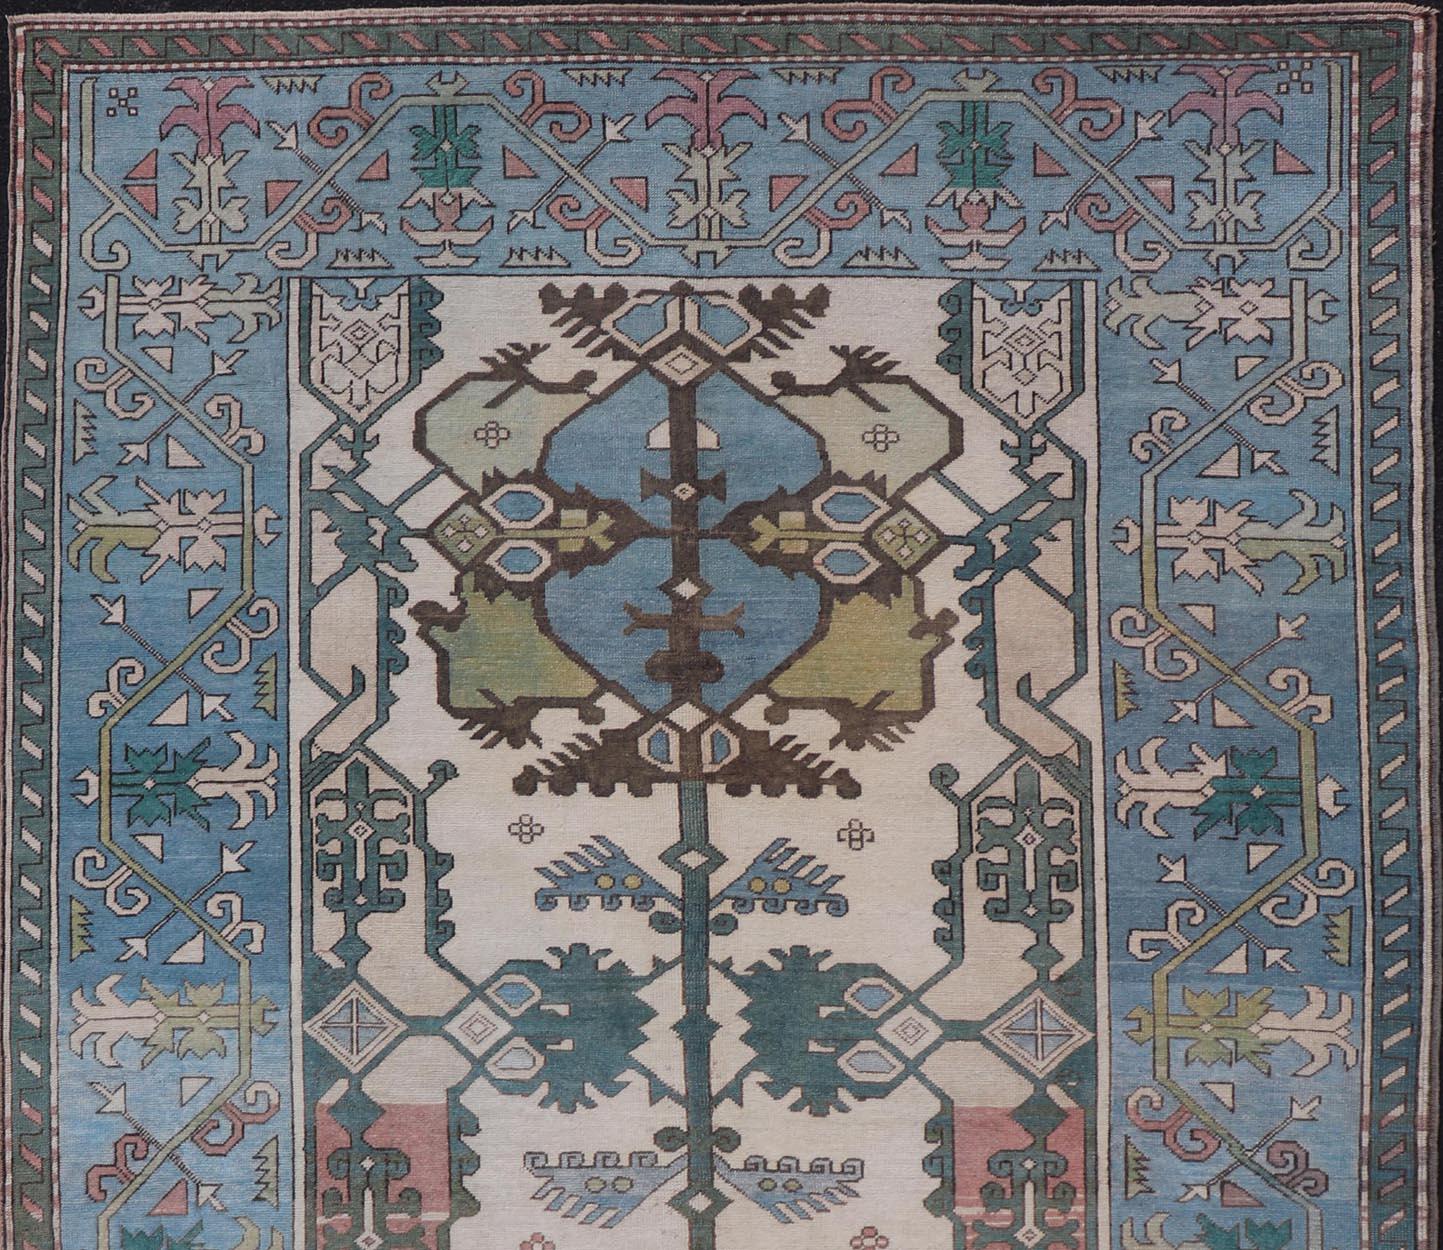 Wool Unique Turkish Rug with Bold Florals in Lt, blue, Lt, Green, Teal & Pink  For Sale